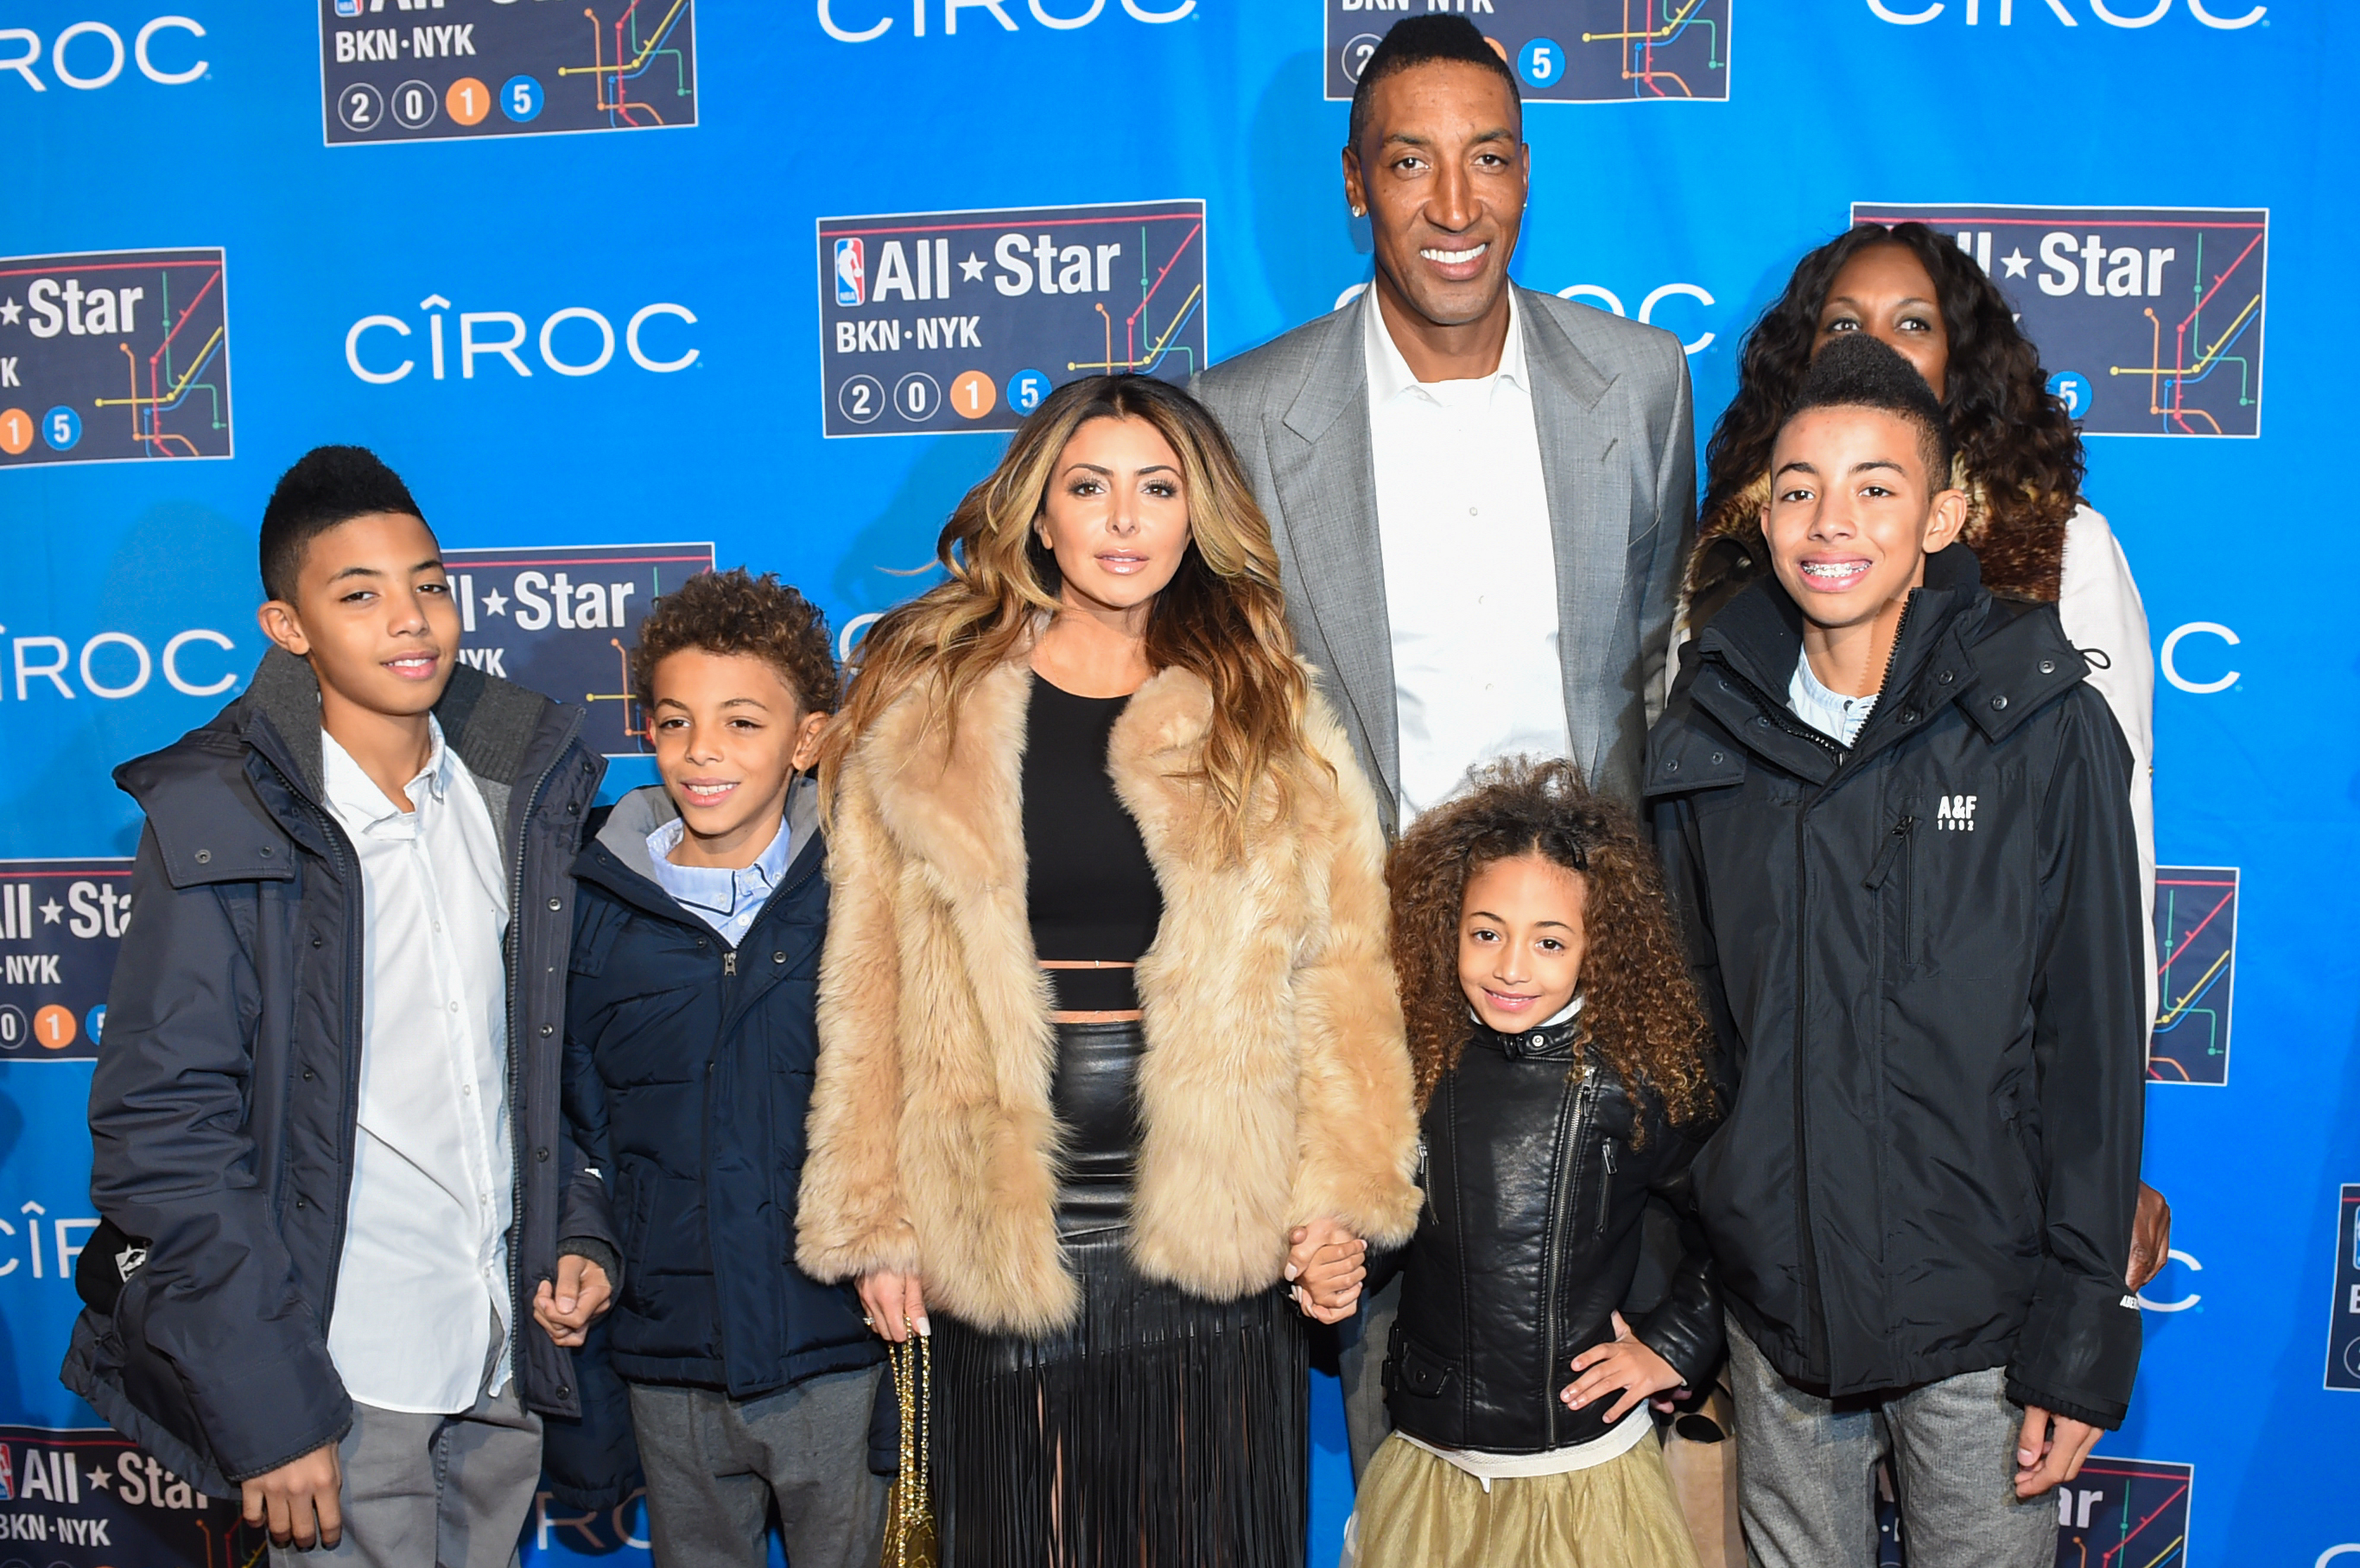 How many kids does Larsa Pippen have? The US Sun